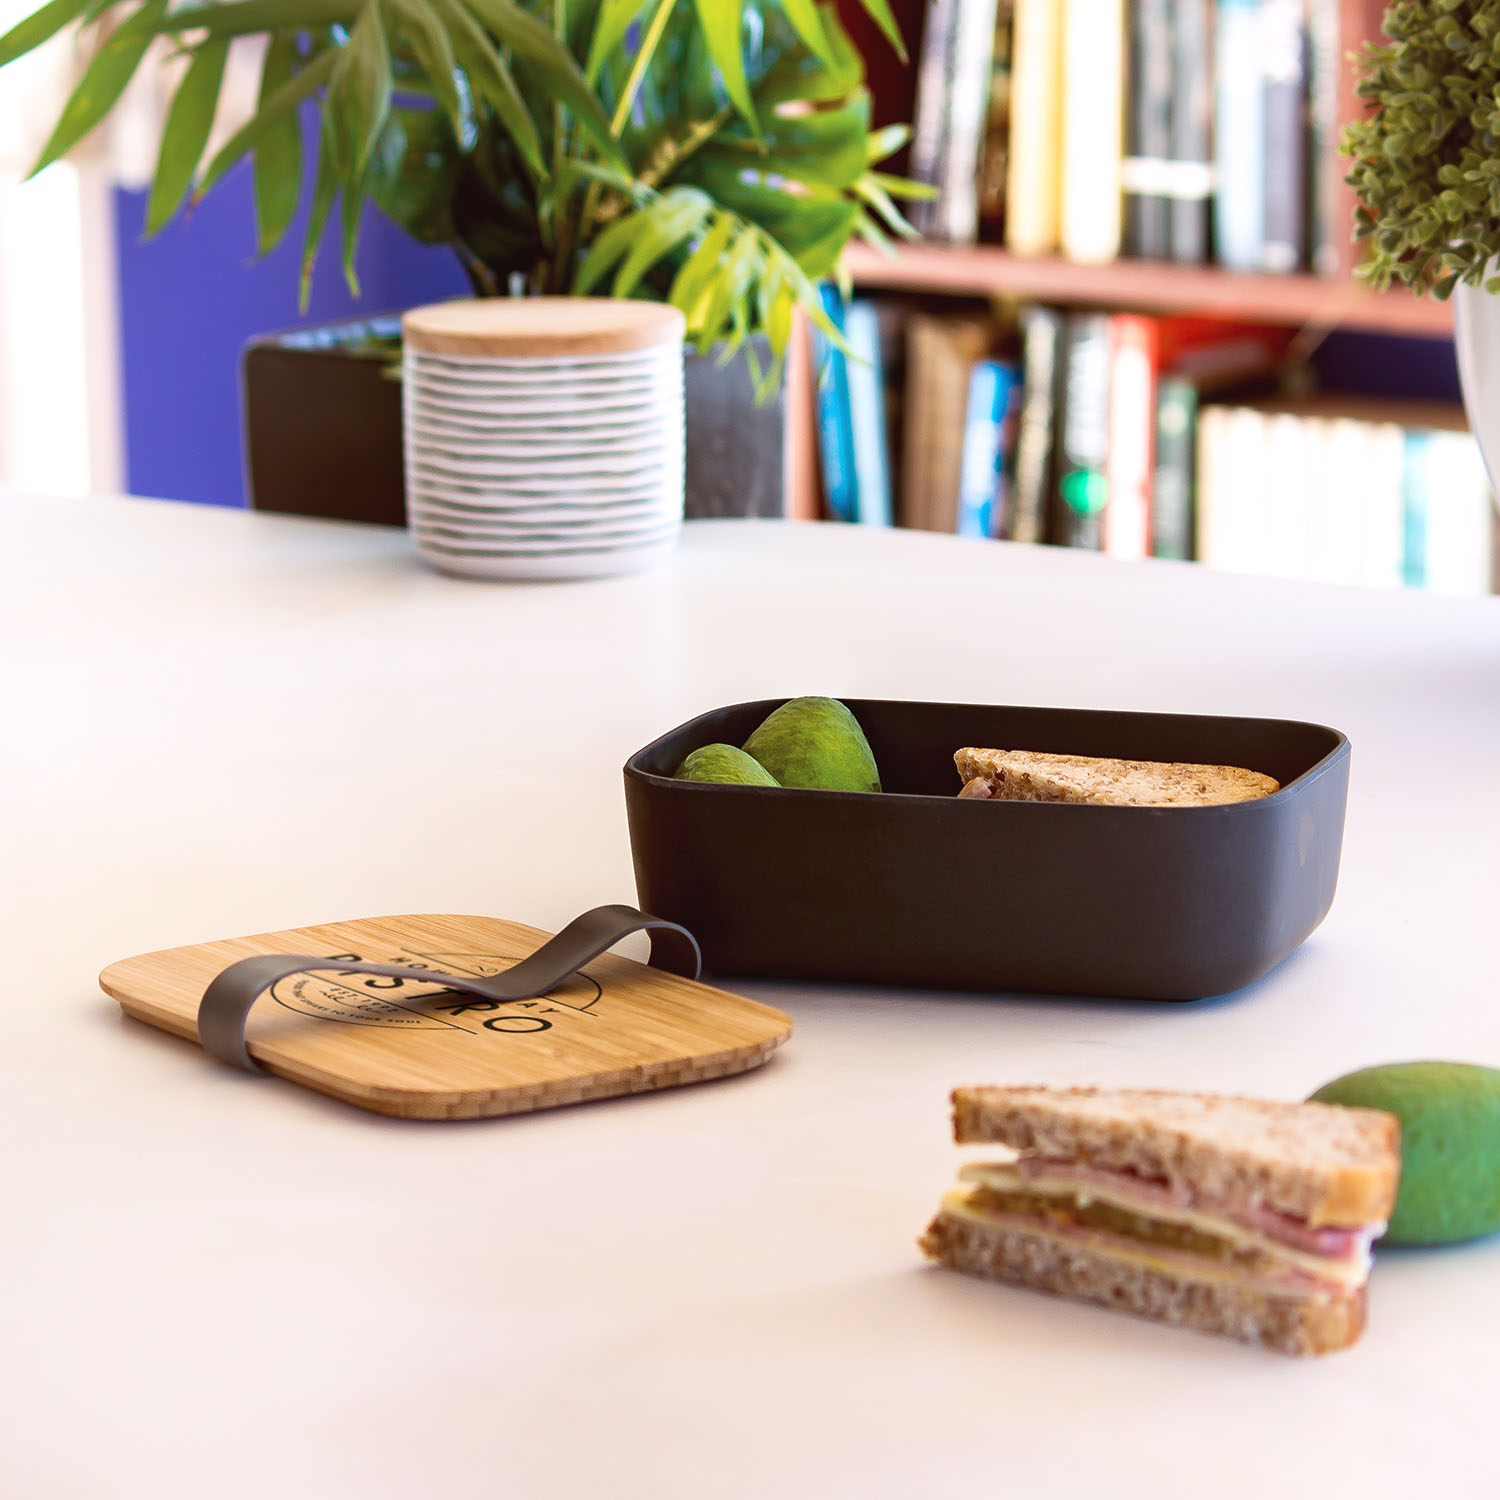 Bamboo Fibre Lunch Box Features